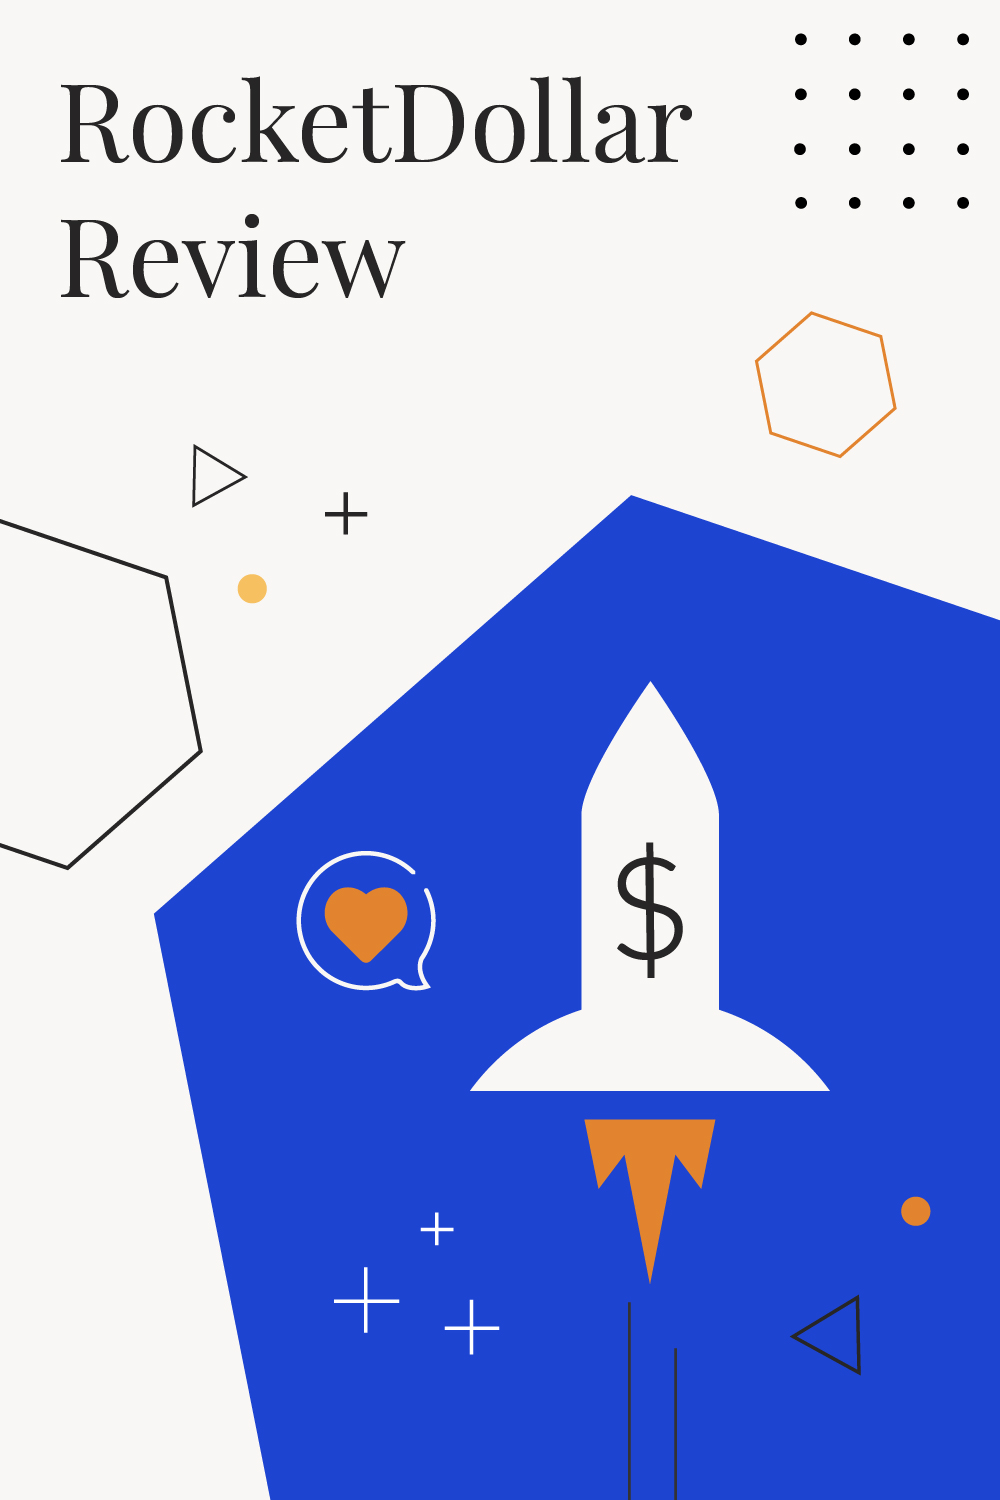 Rocket Dollar Review | Features, Pros & Cons, & Pricing